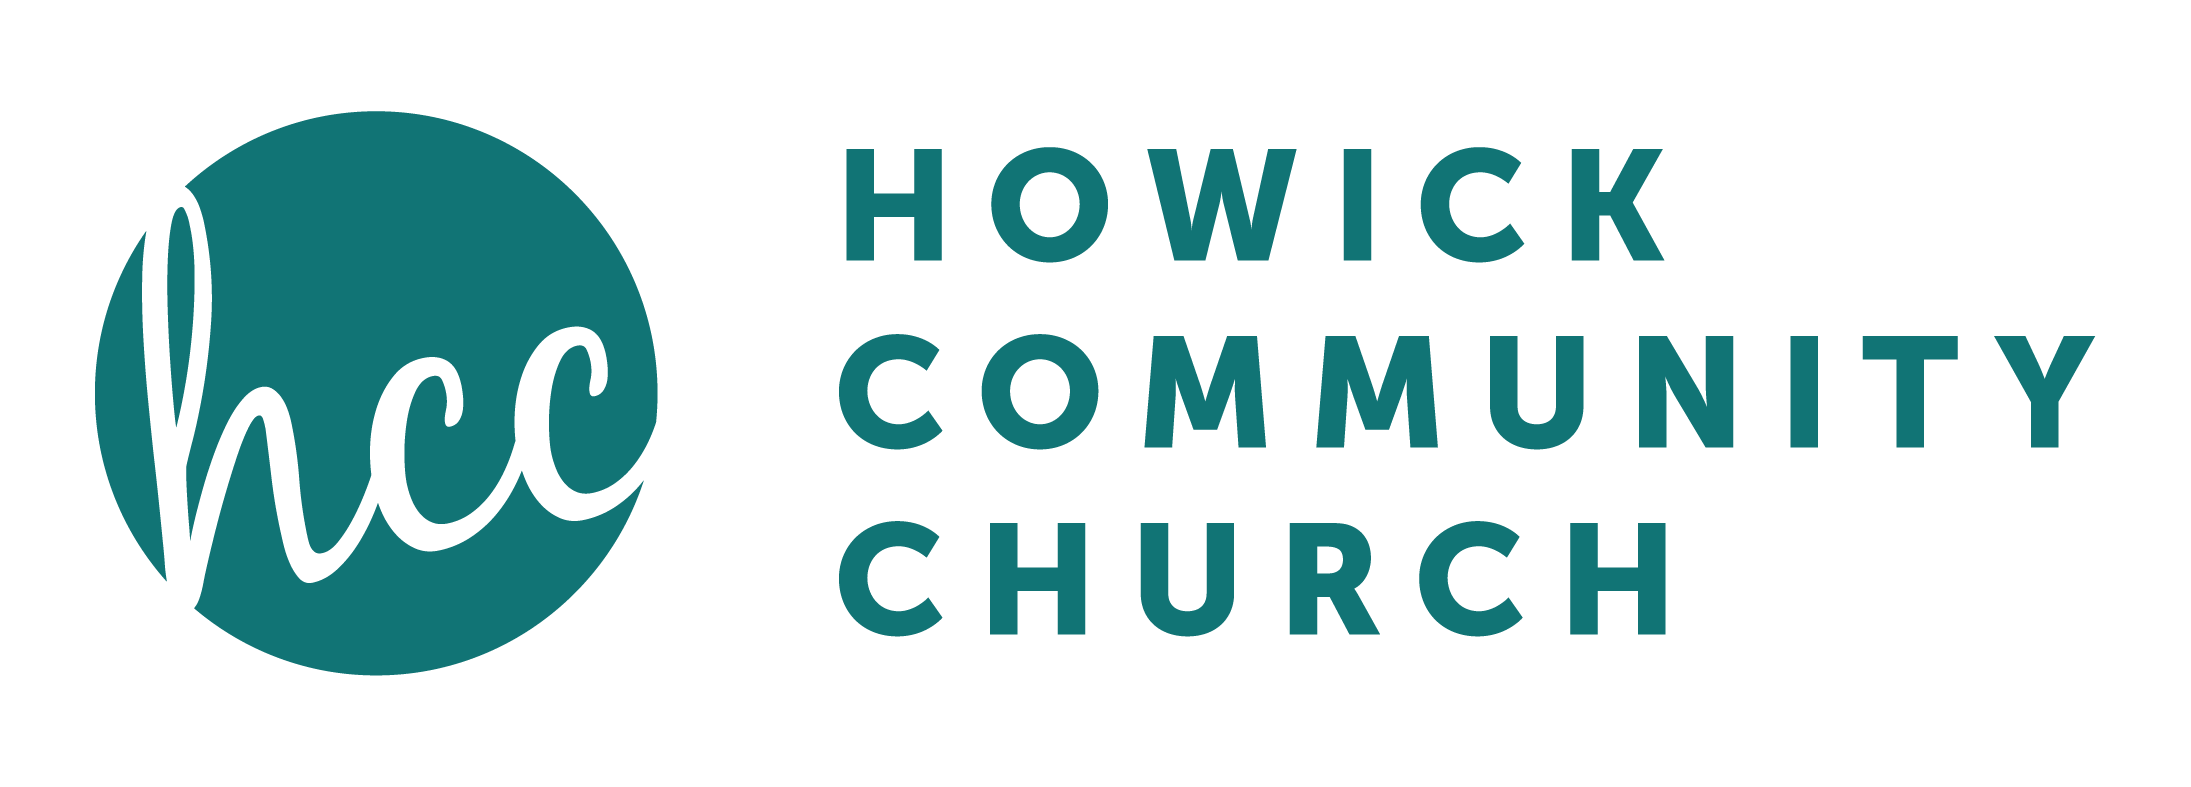 Howick Community Church &amp; The Sowers Trust